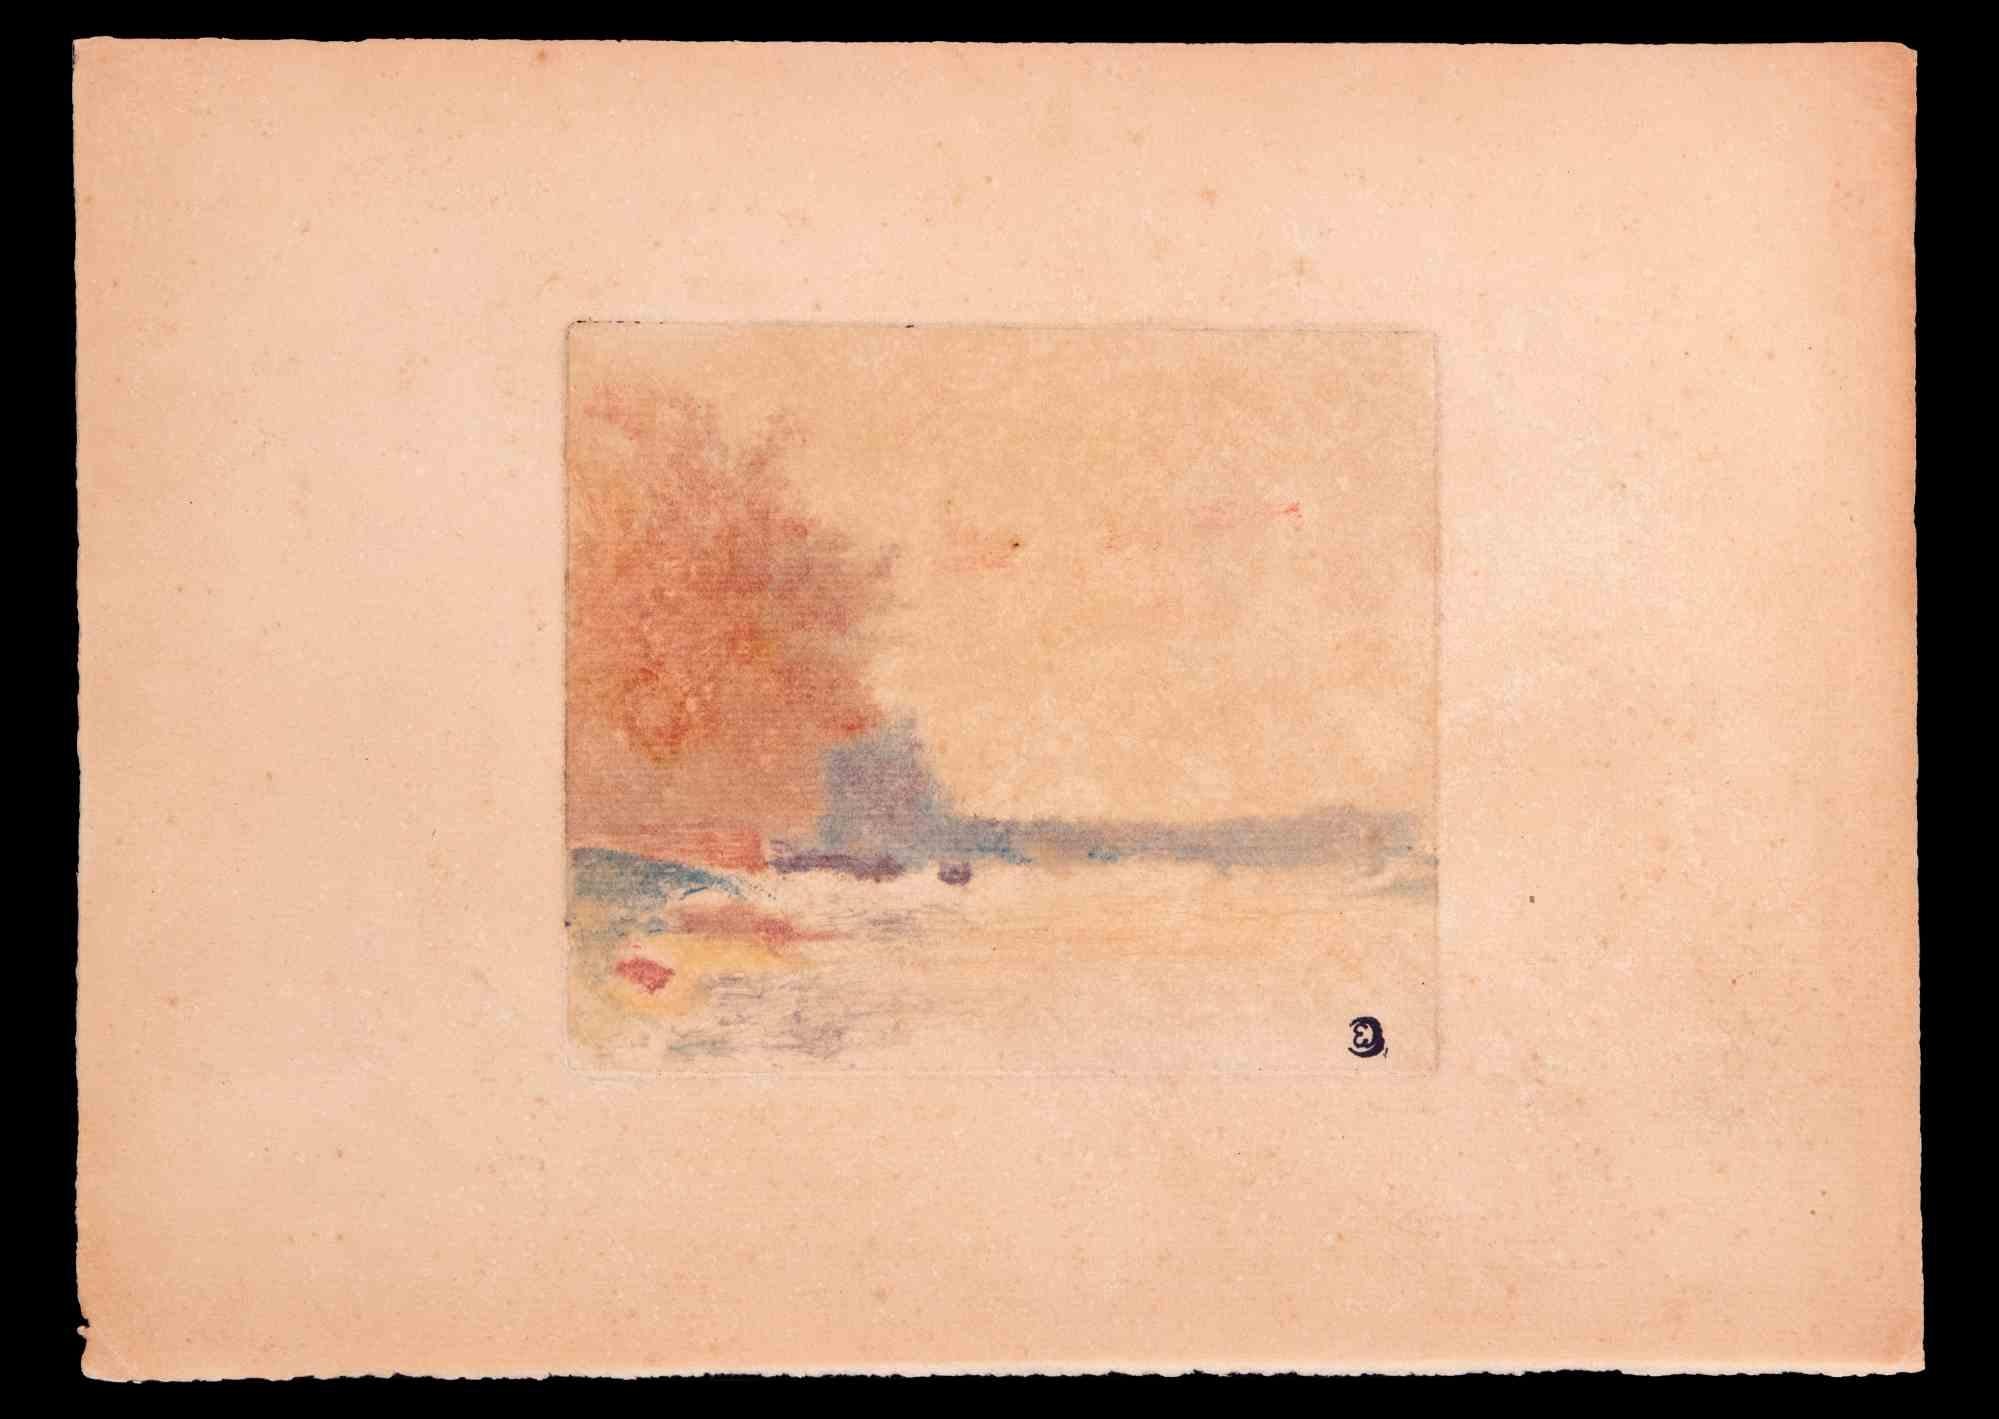 Landscape is an original etching realized in the early 20th Century by Edmond Cuisinier (1857-1917).

Good conditions except for being aged.

Monogrammed.

The artwork is depicted through deft strokes by mastery.